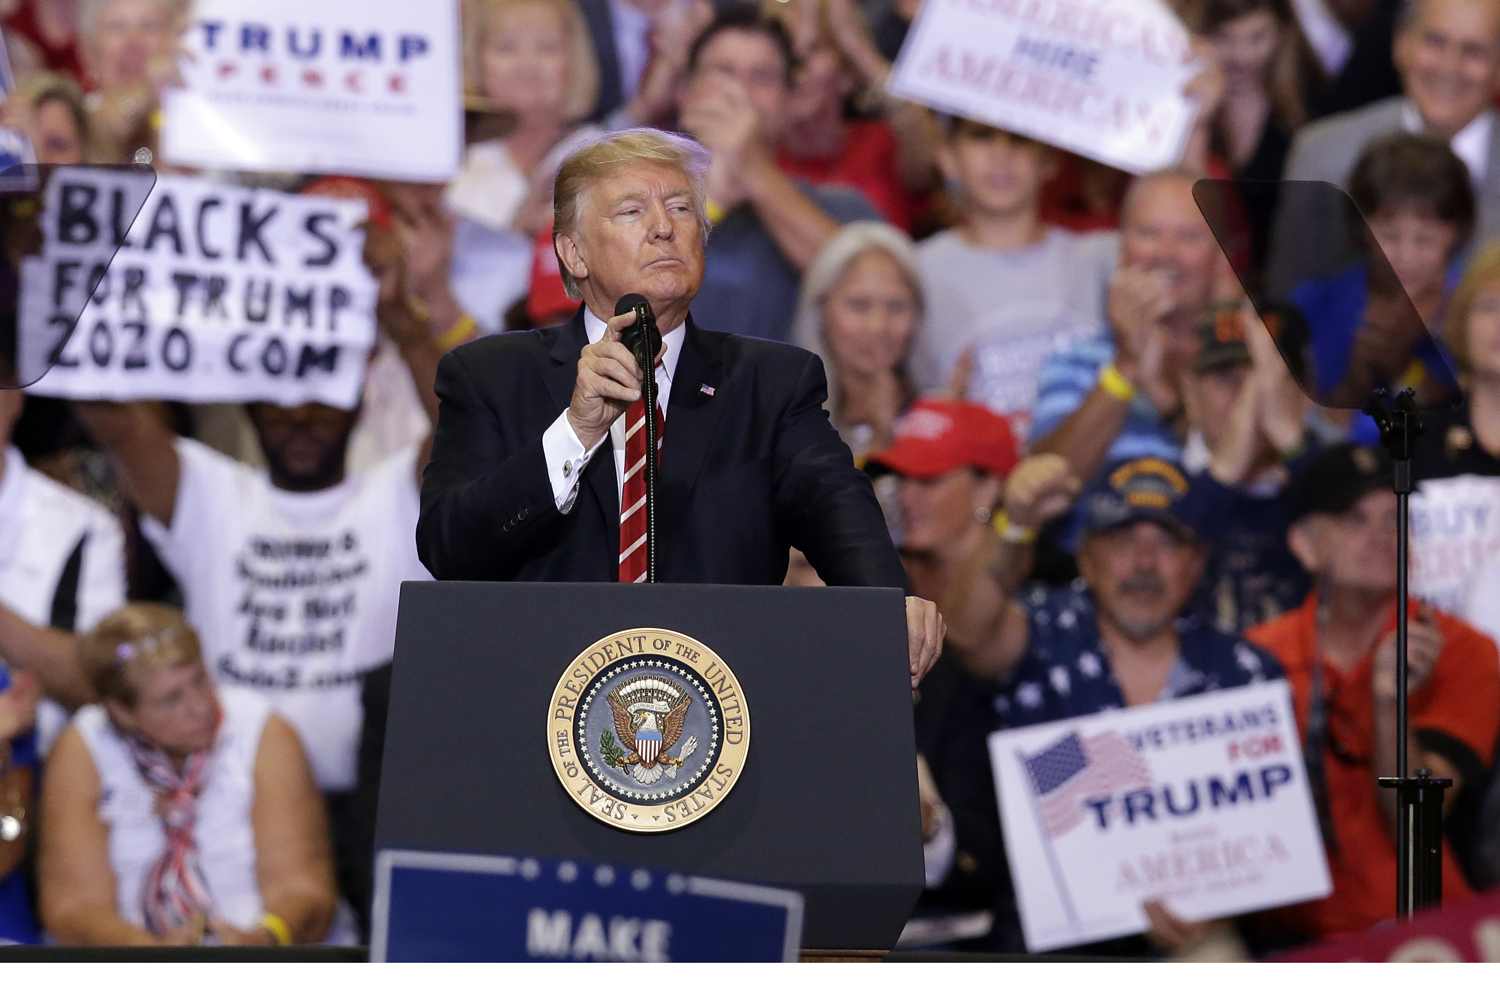 President Donald Trump gestures to the crowd while speaking at a rally at the Phoenix Convention Center, Tuesday, Aug. 22, 2017, in Phoenix. (Rick Scuteri/AP)